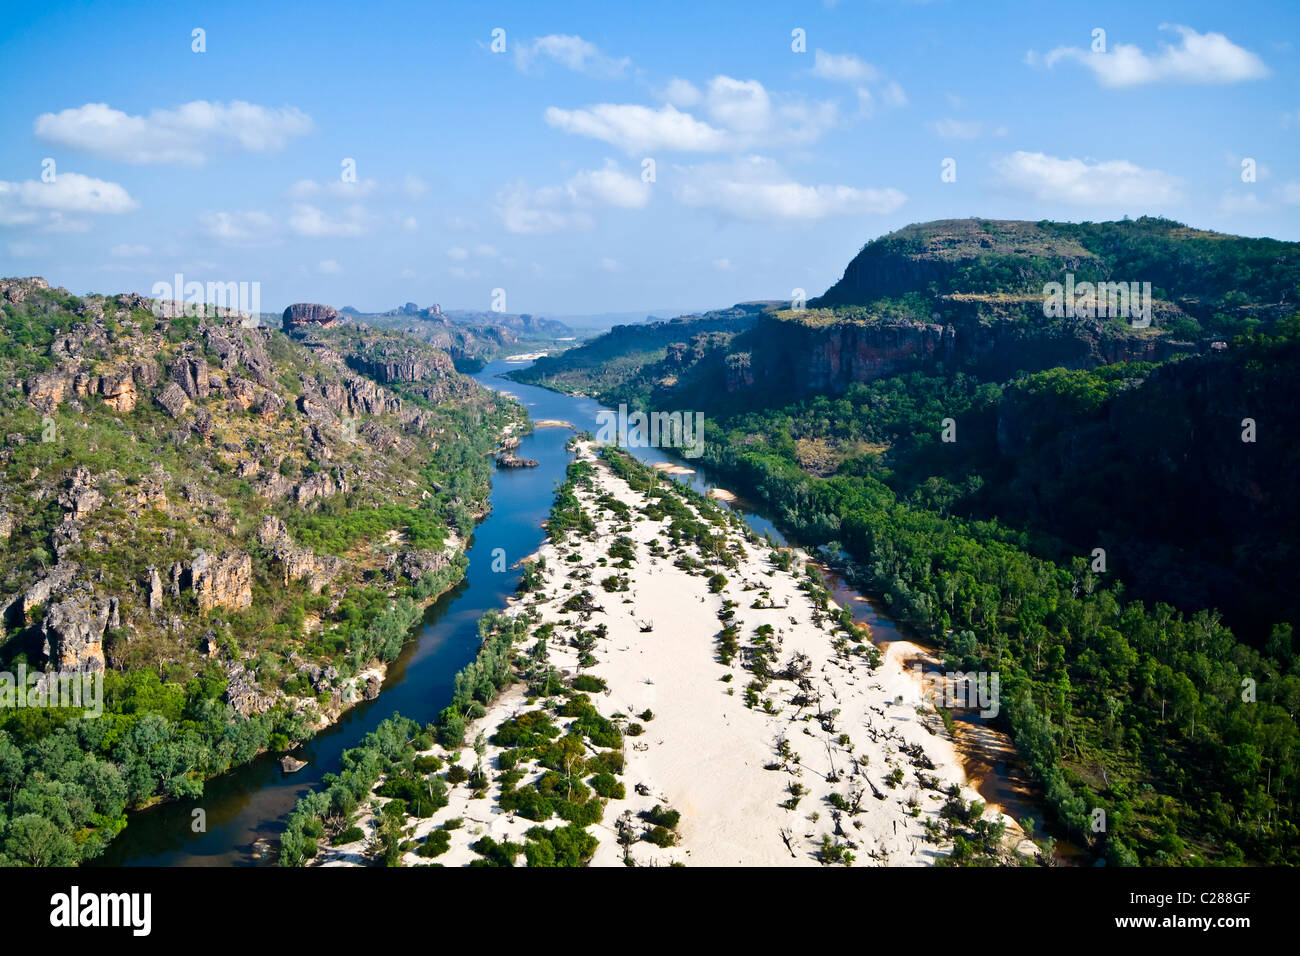 A river forks around a sand island in a rugged escarpment gorge. Stock Photo